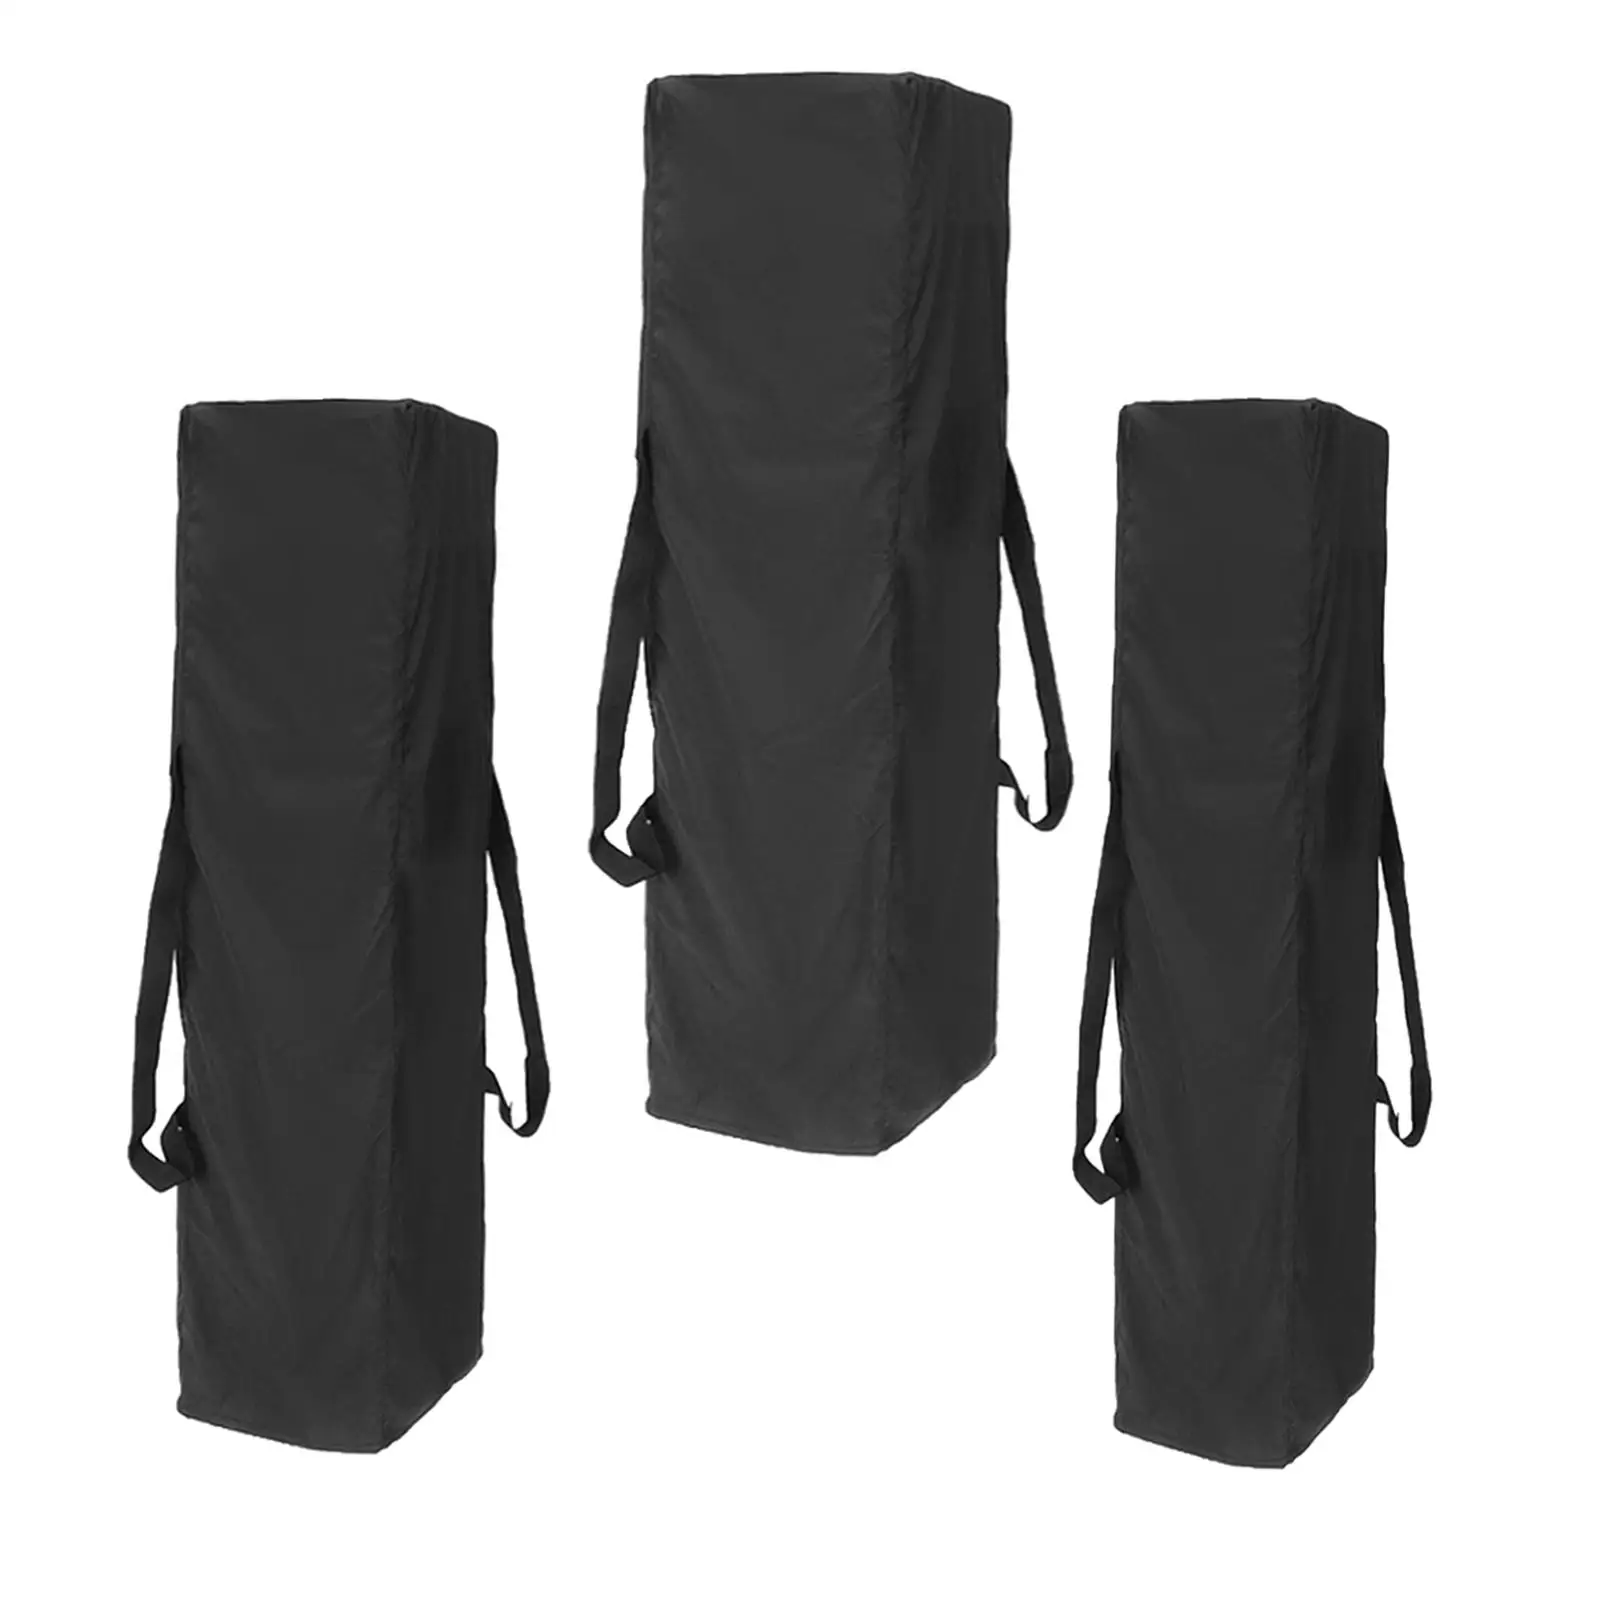 3 Sizes Polyester Heavy Duty Up Canopy Tent Waterproof Fabric Bag Black